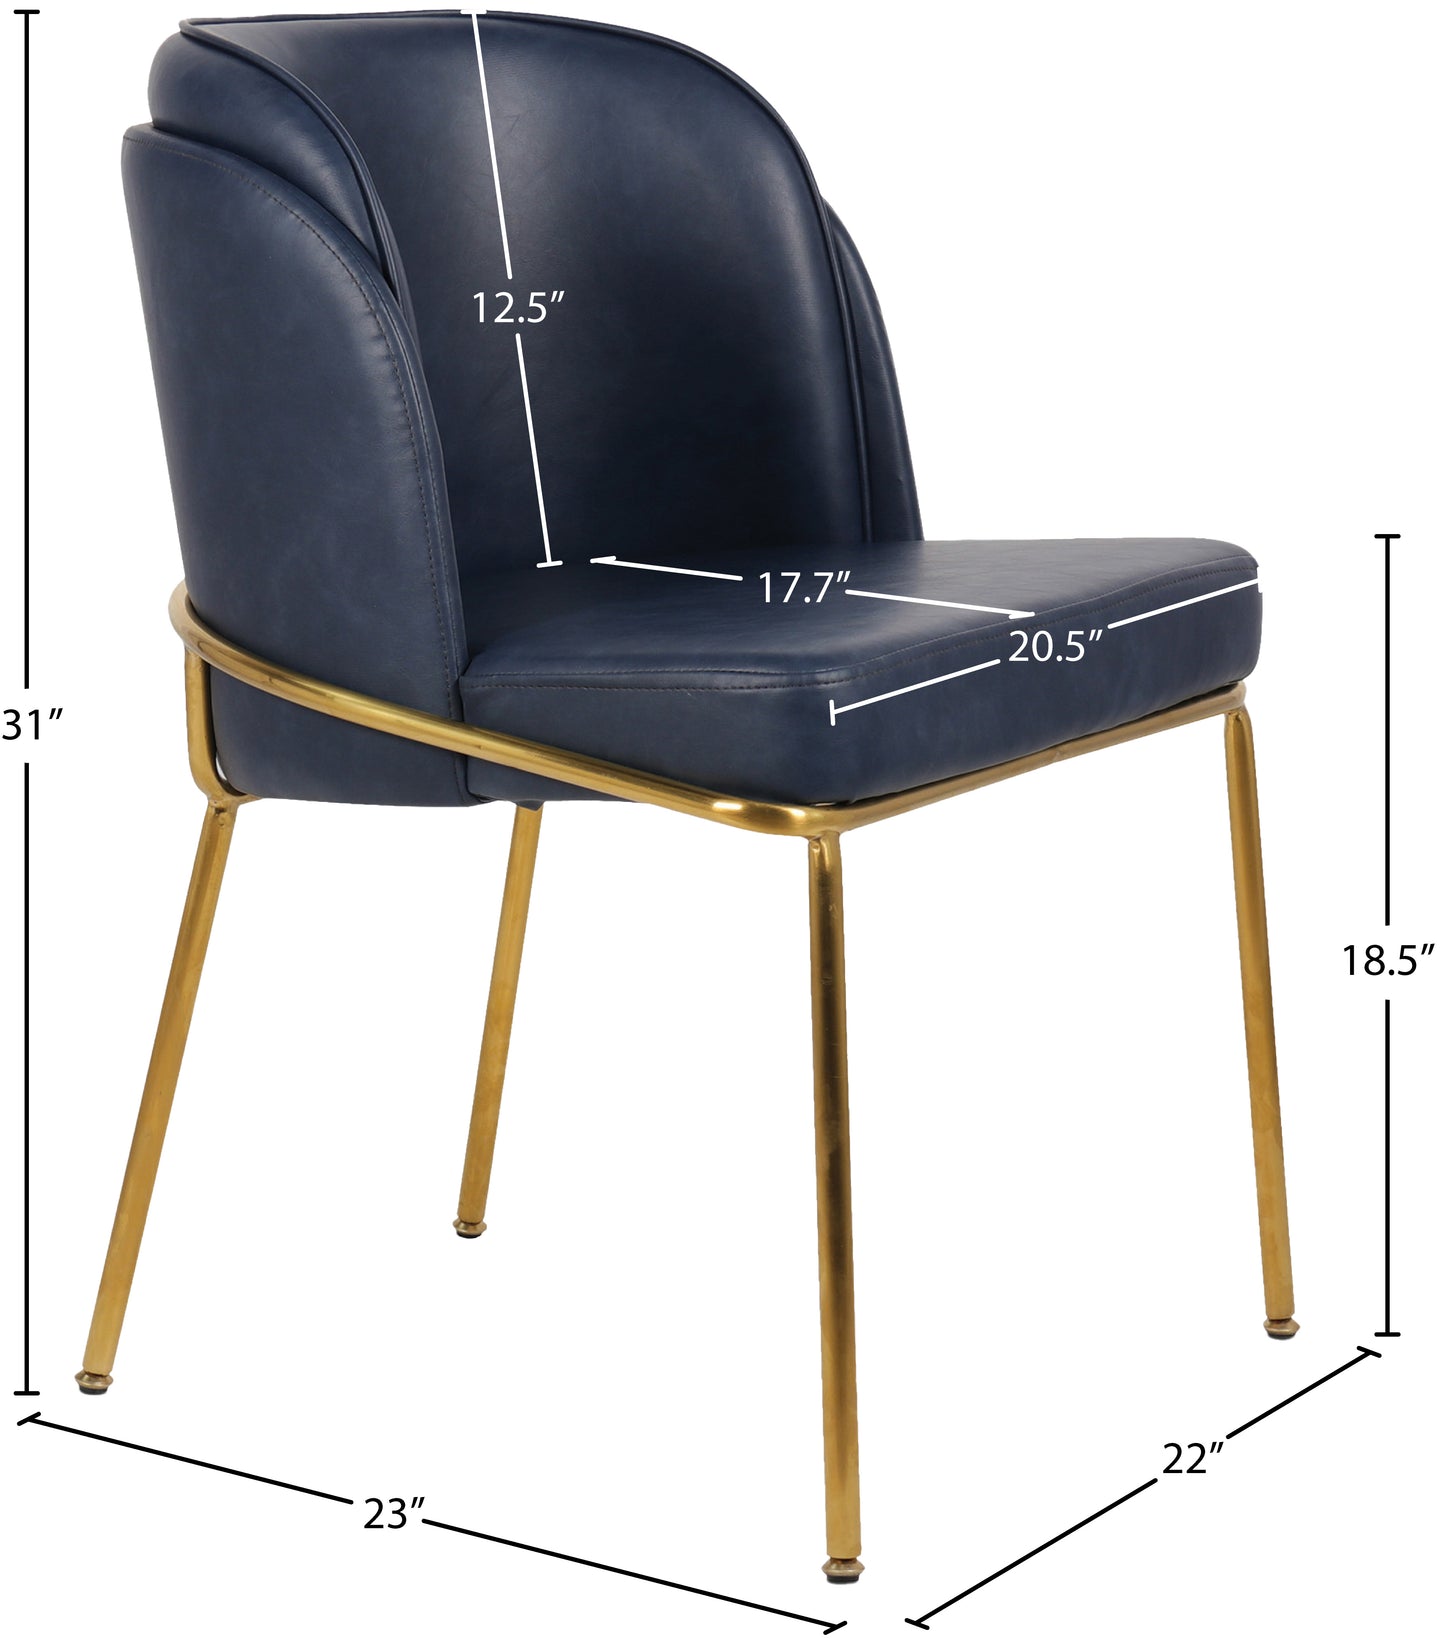 reflection navy faux leather dining chair c